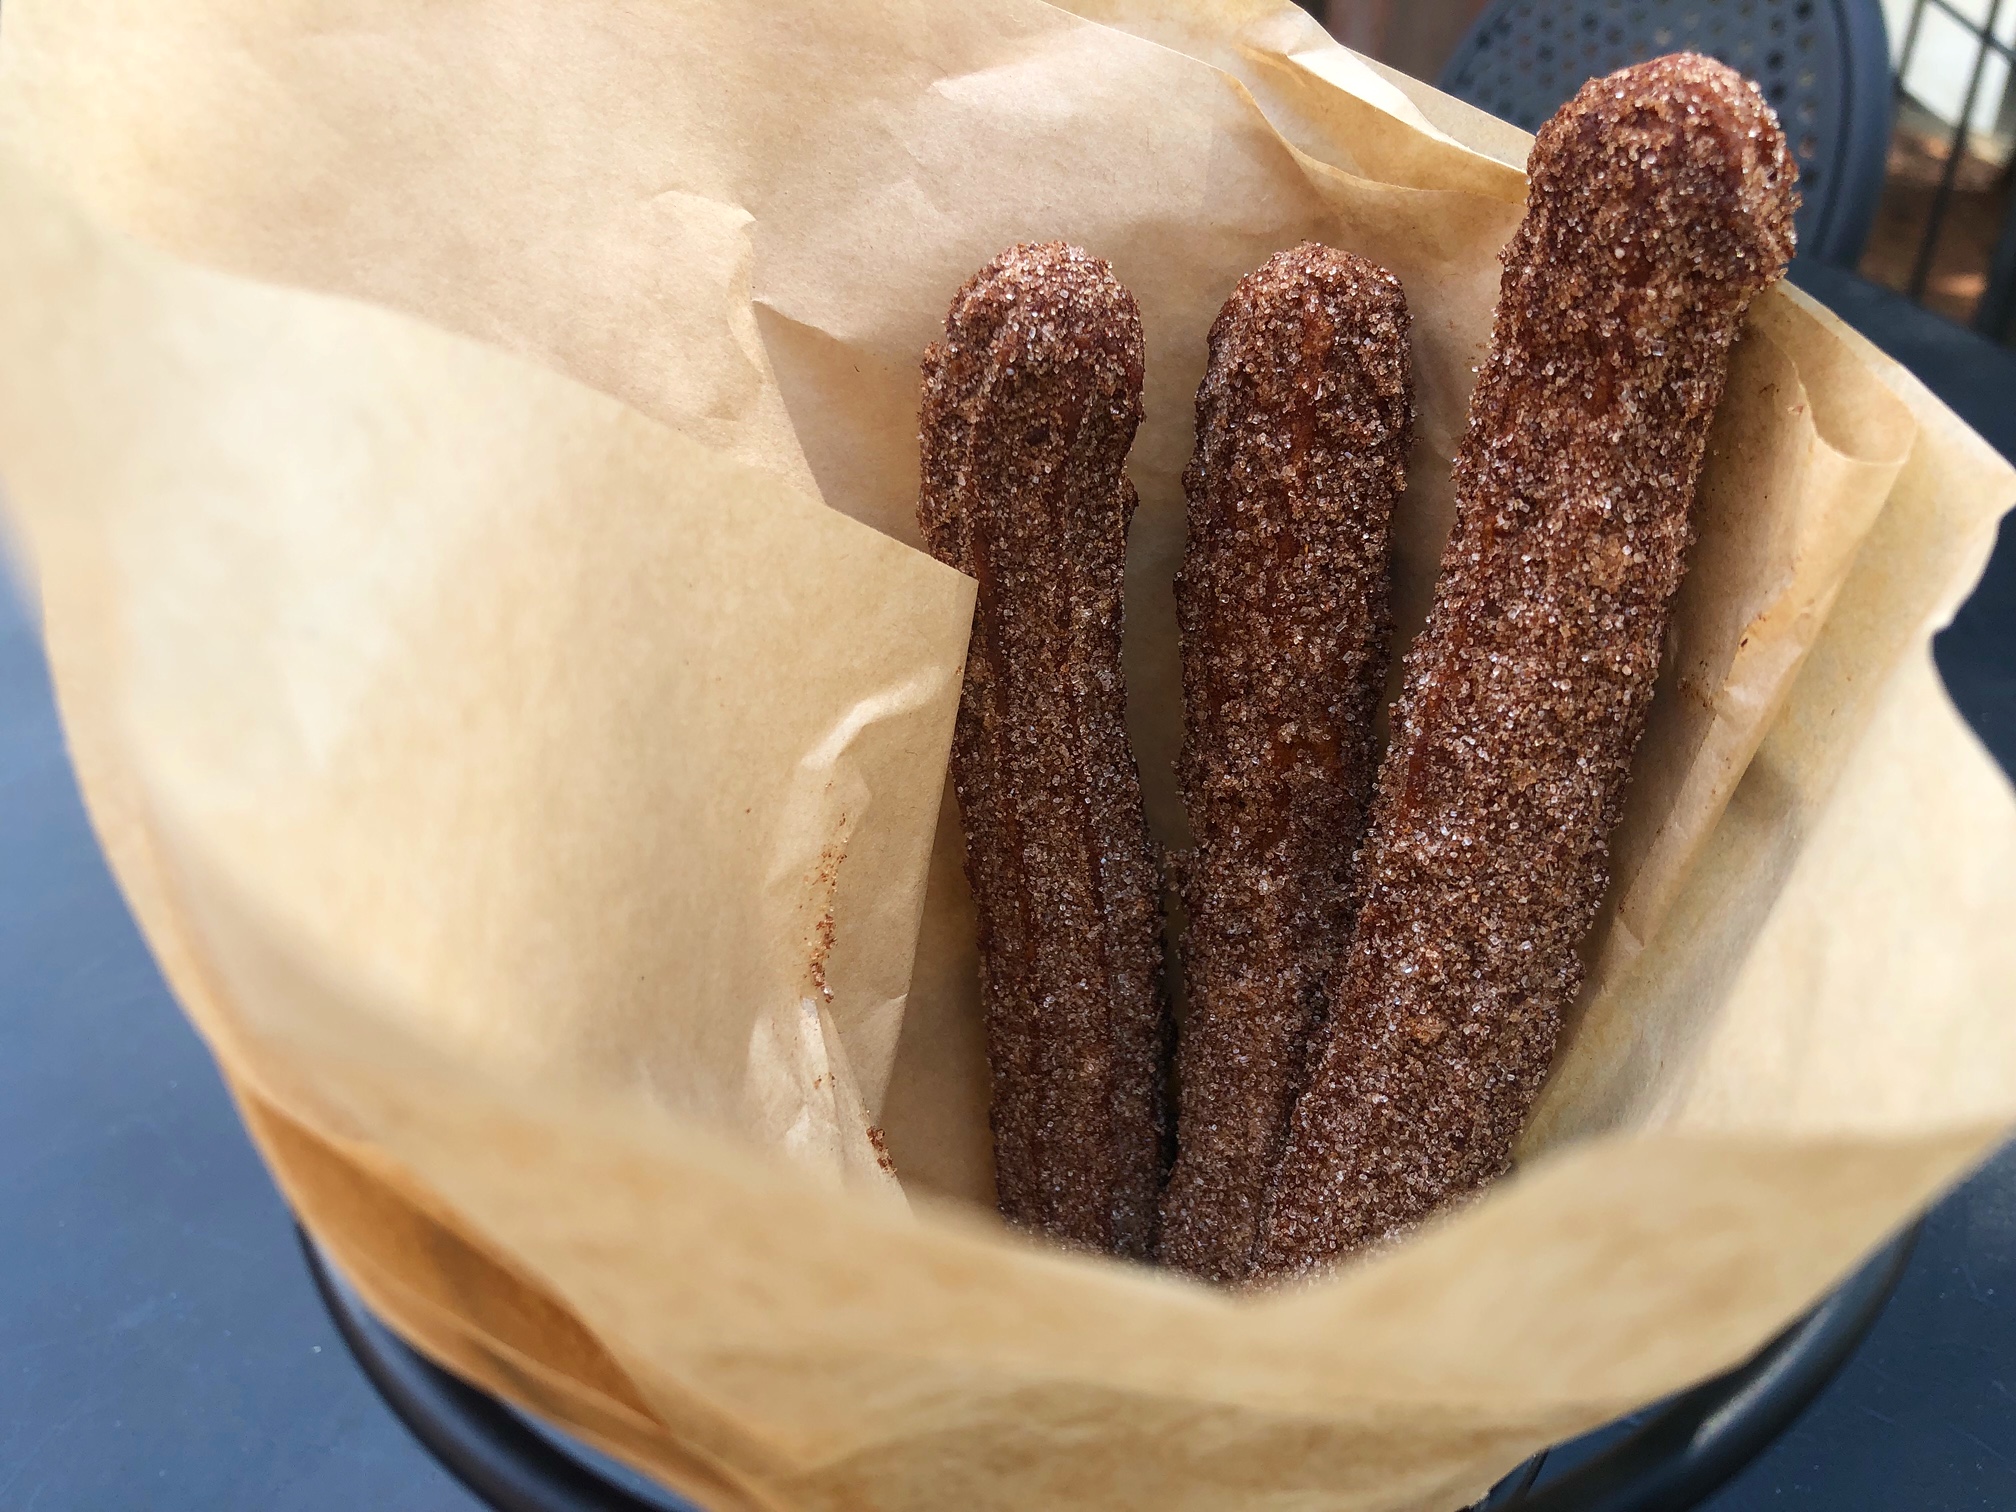 In brown parchment paper inside a black metal cone at Maize at the Station in Downtown Champaign, there are three long churros dusted with cinnamon sugar. Photo by Alyssa Buckley.